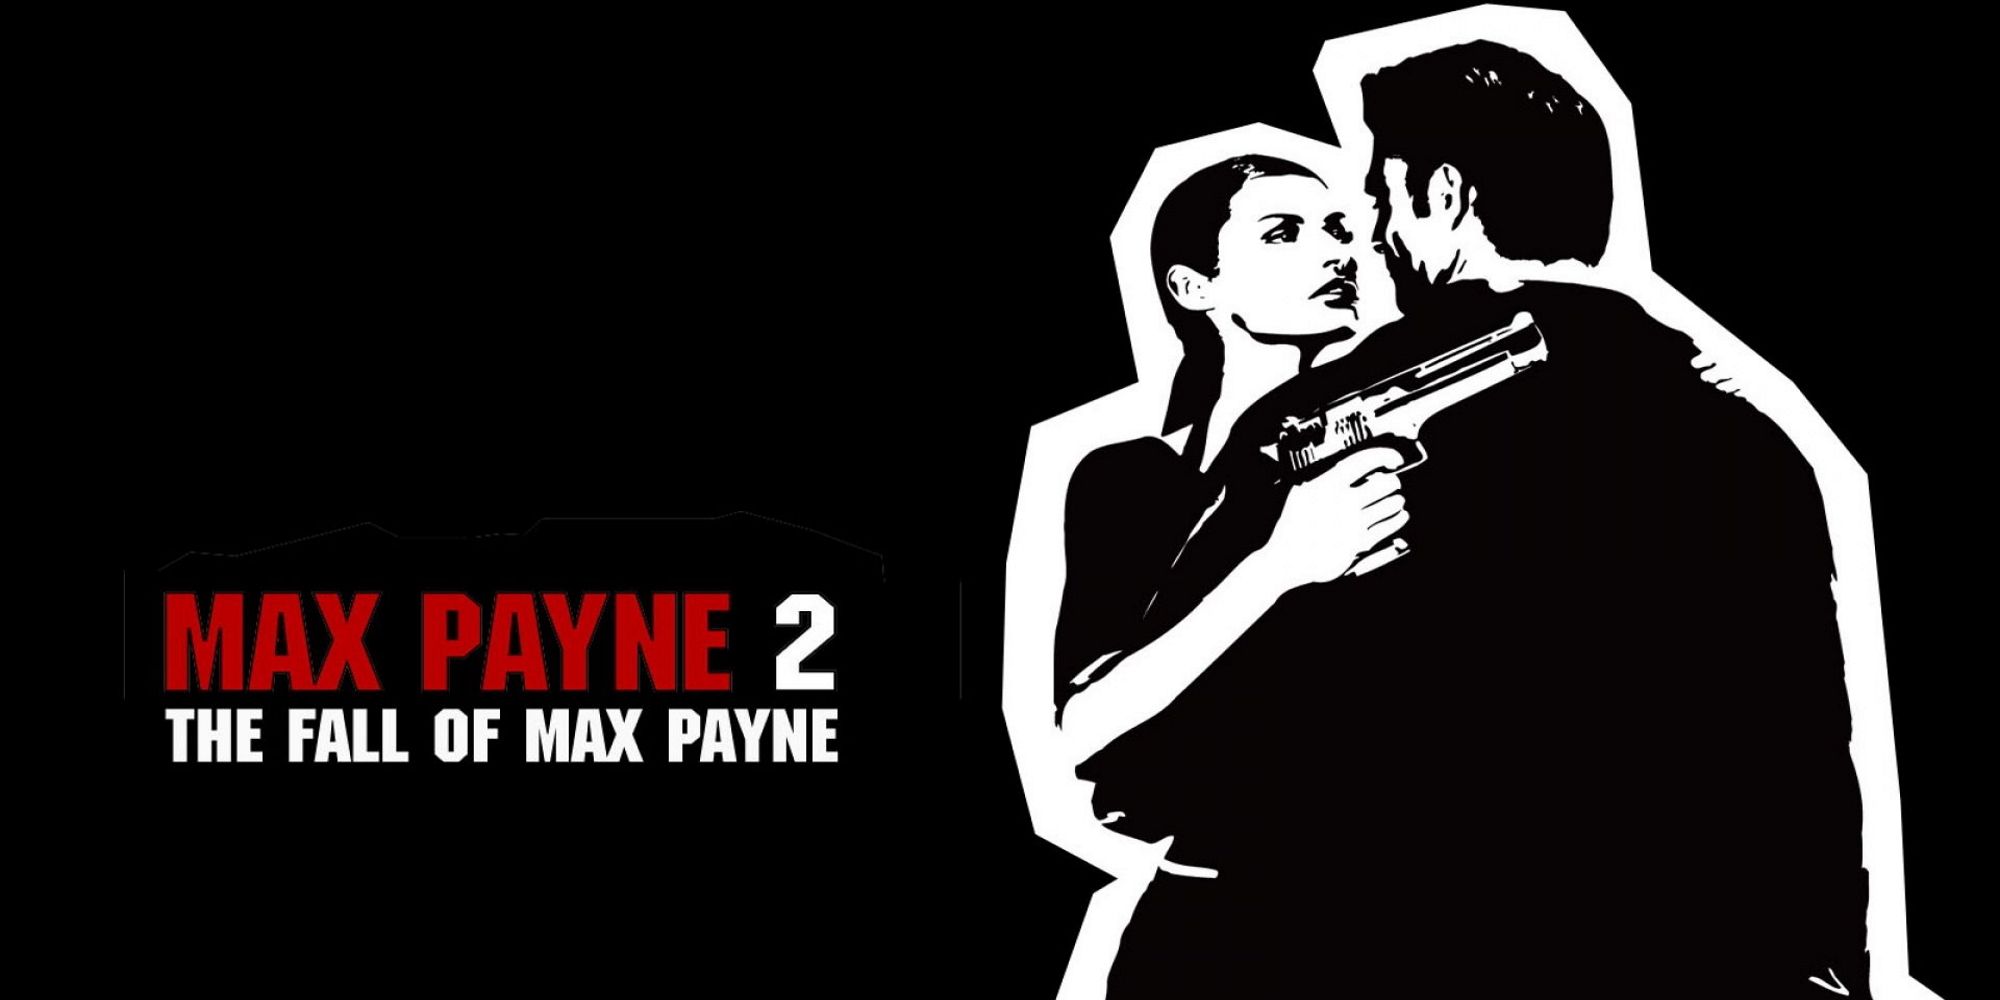 The cover artwork of Max Payne 2: The Fall of Max Payne